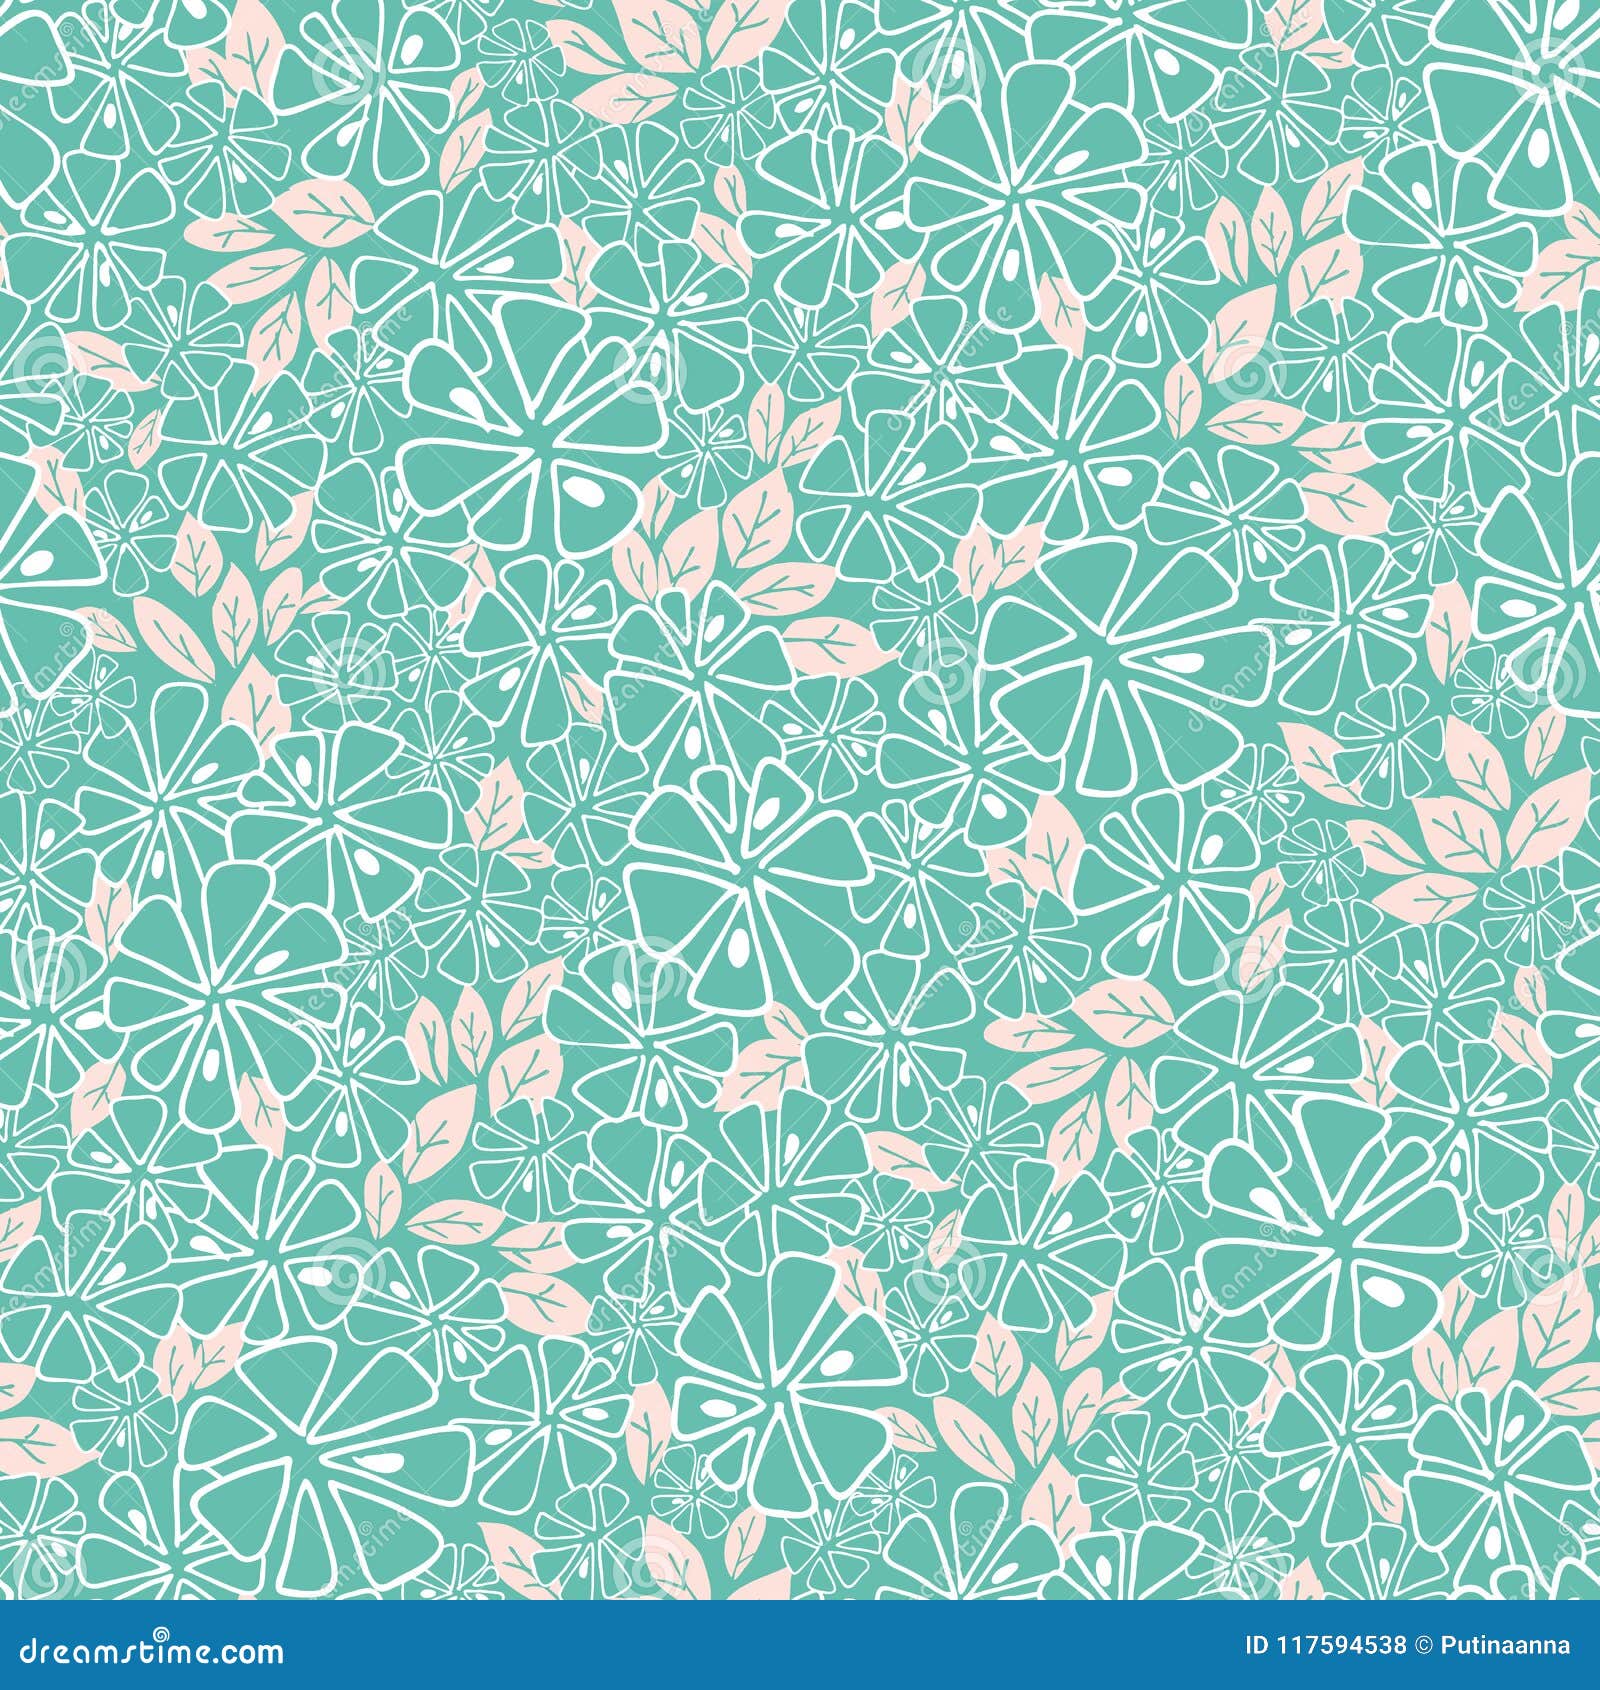  turqouise and white flowers and pink foliage seamless pattern background